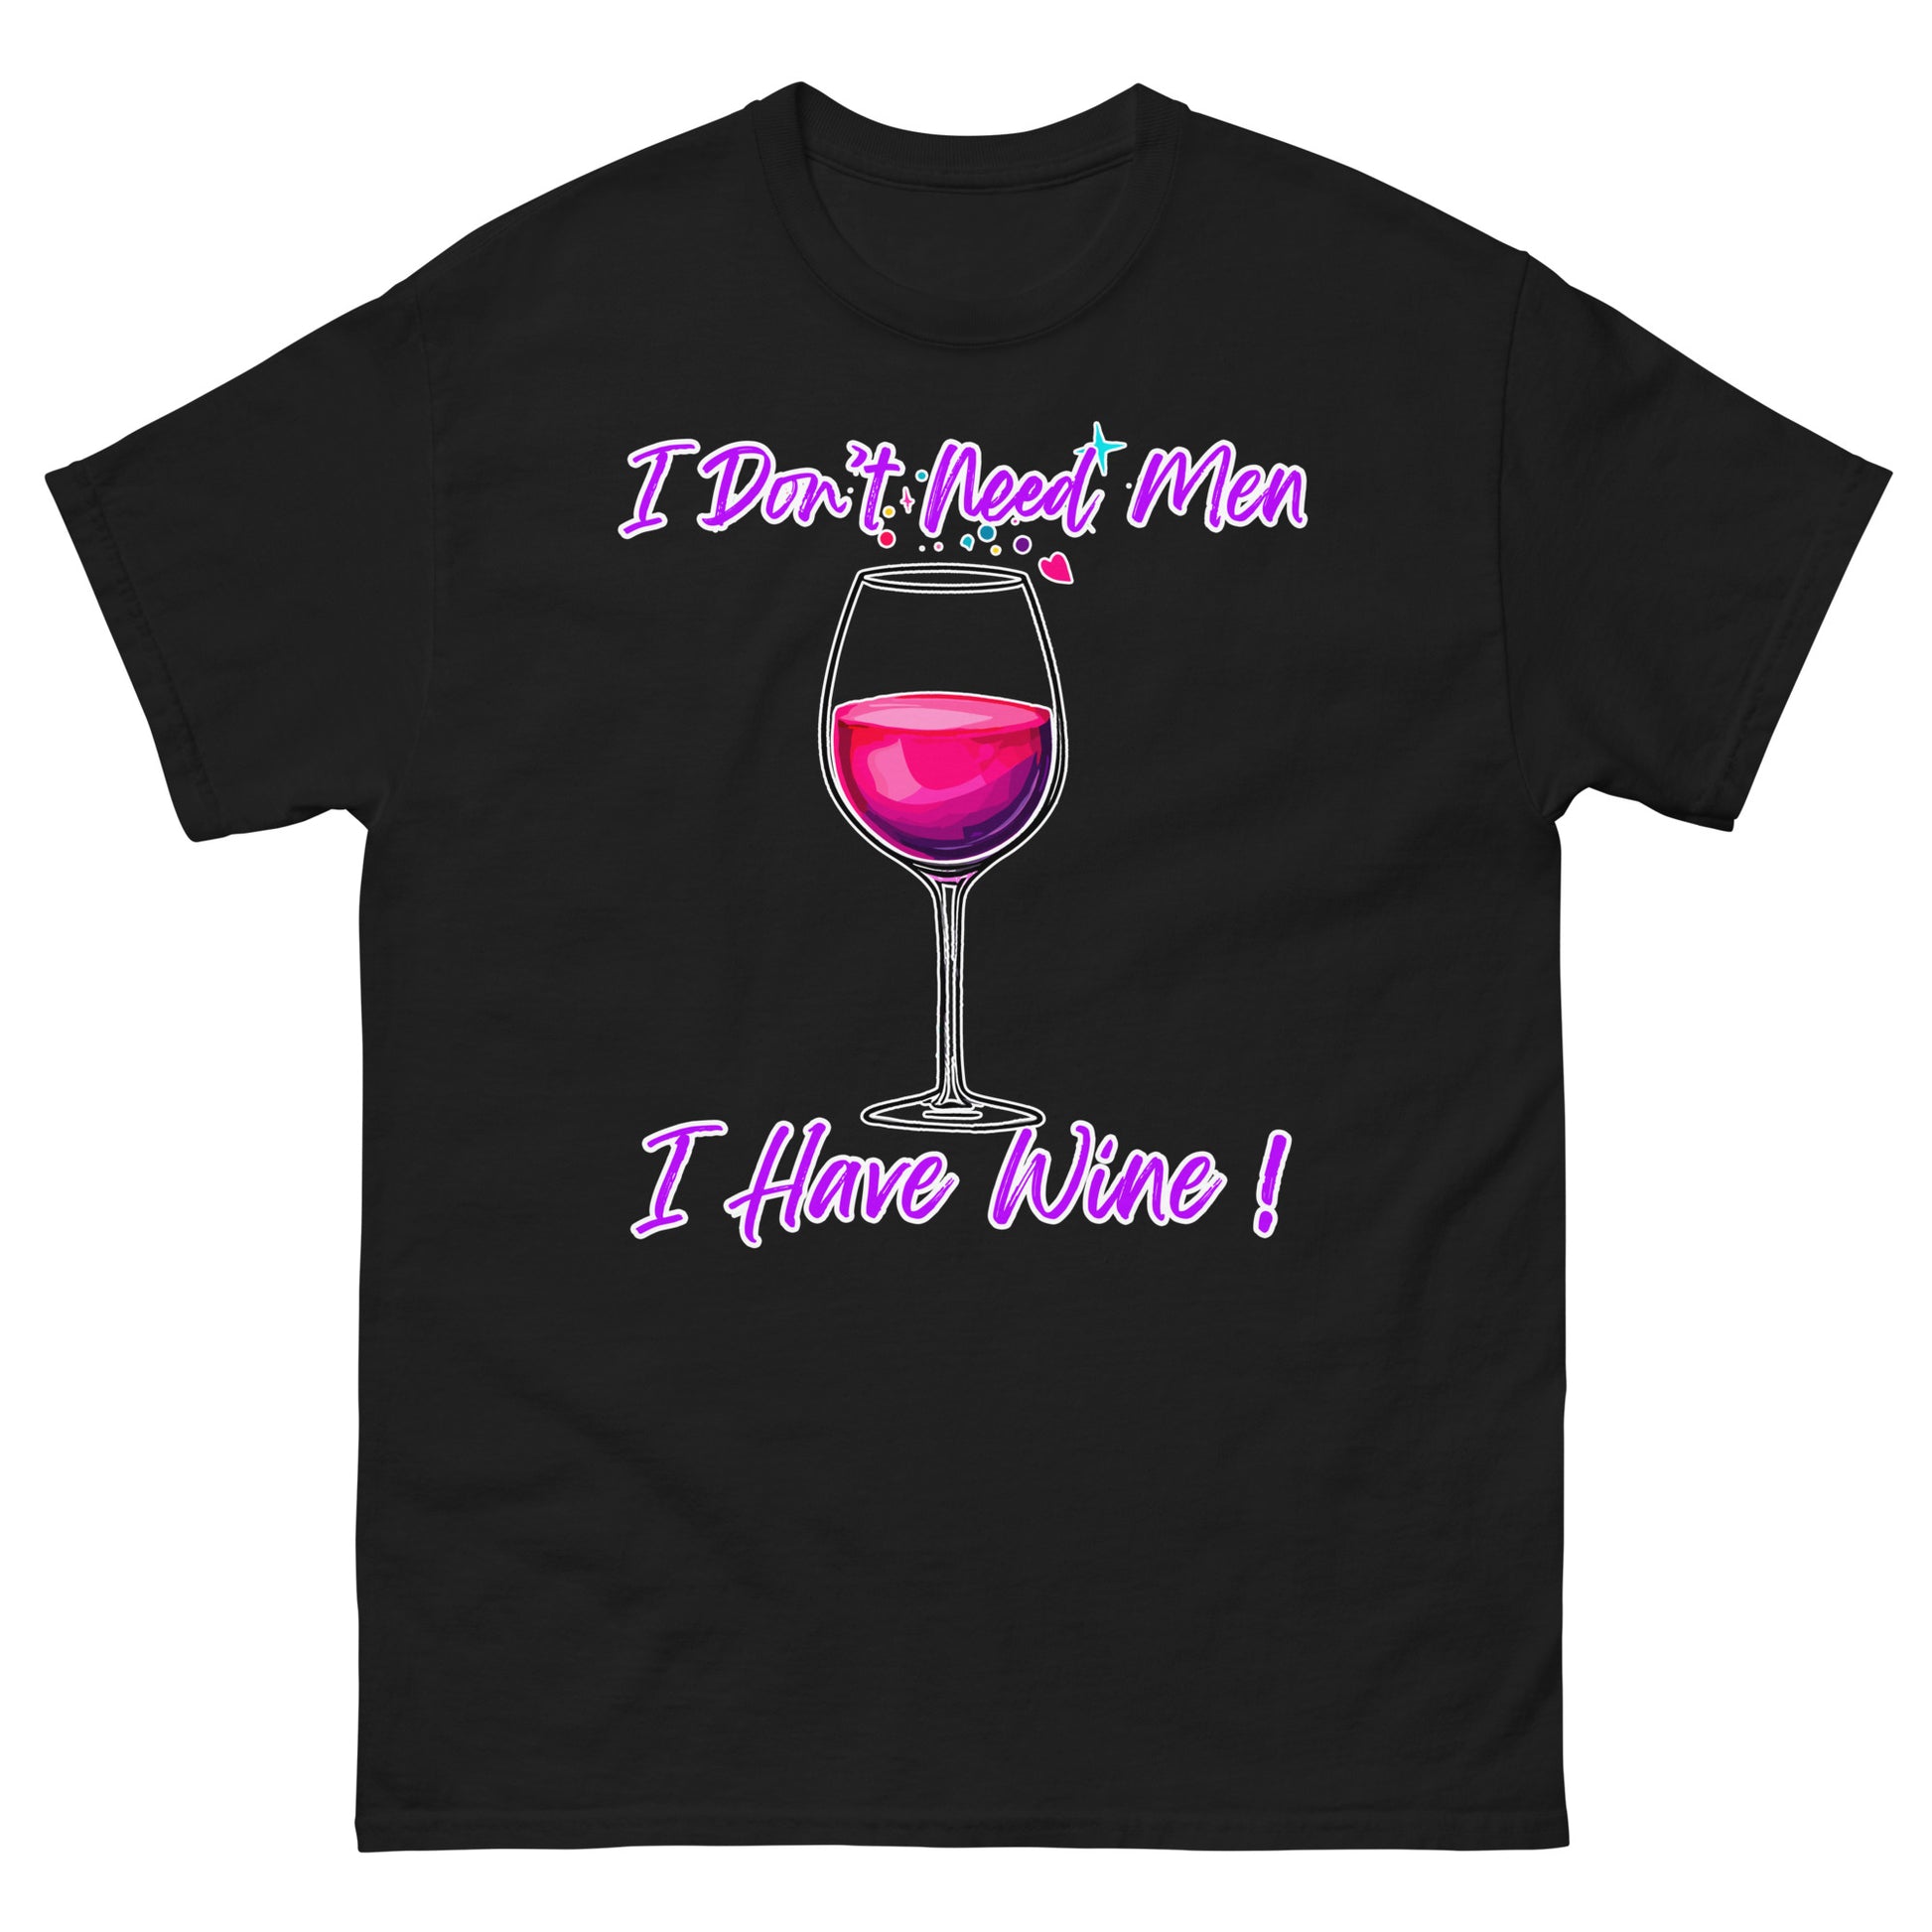 I don't need men I have wine design printed t-shirt by Whistler Shirt